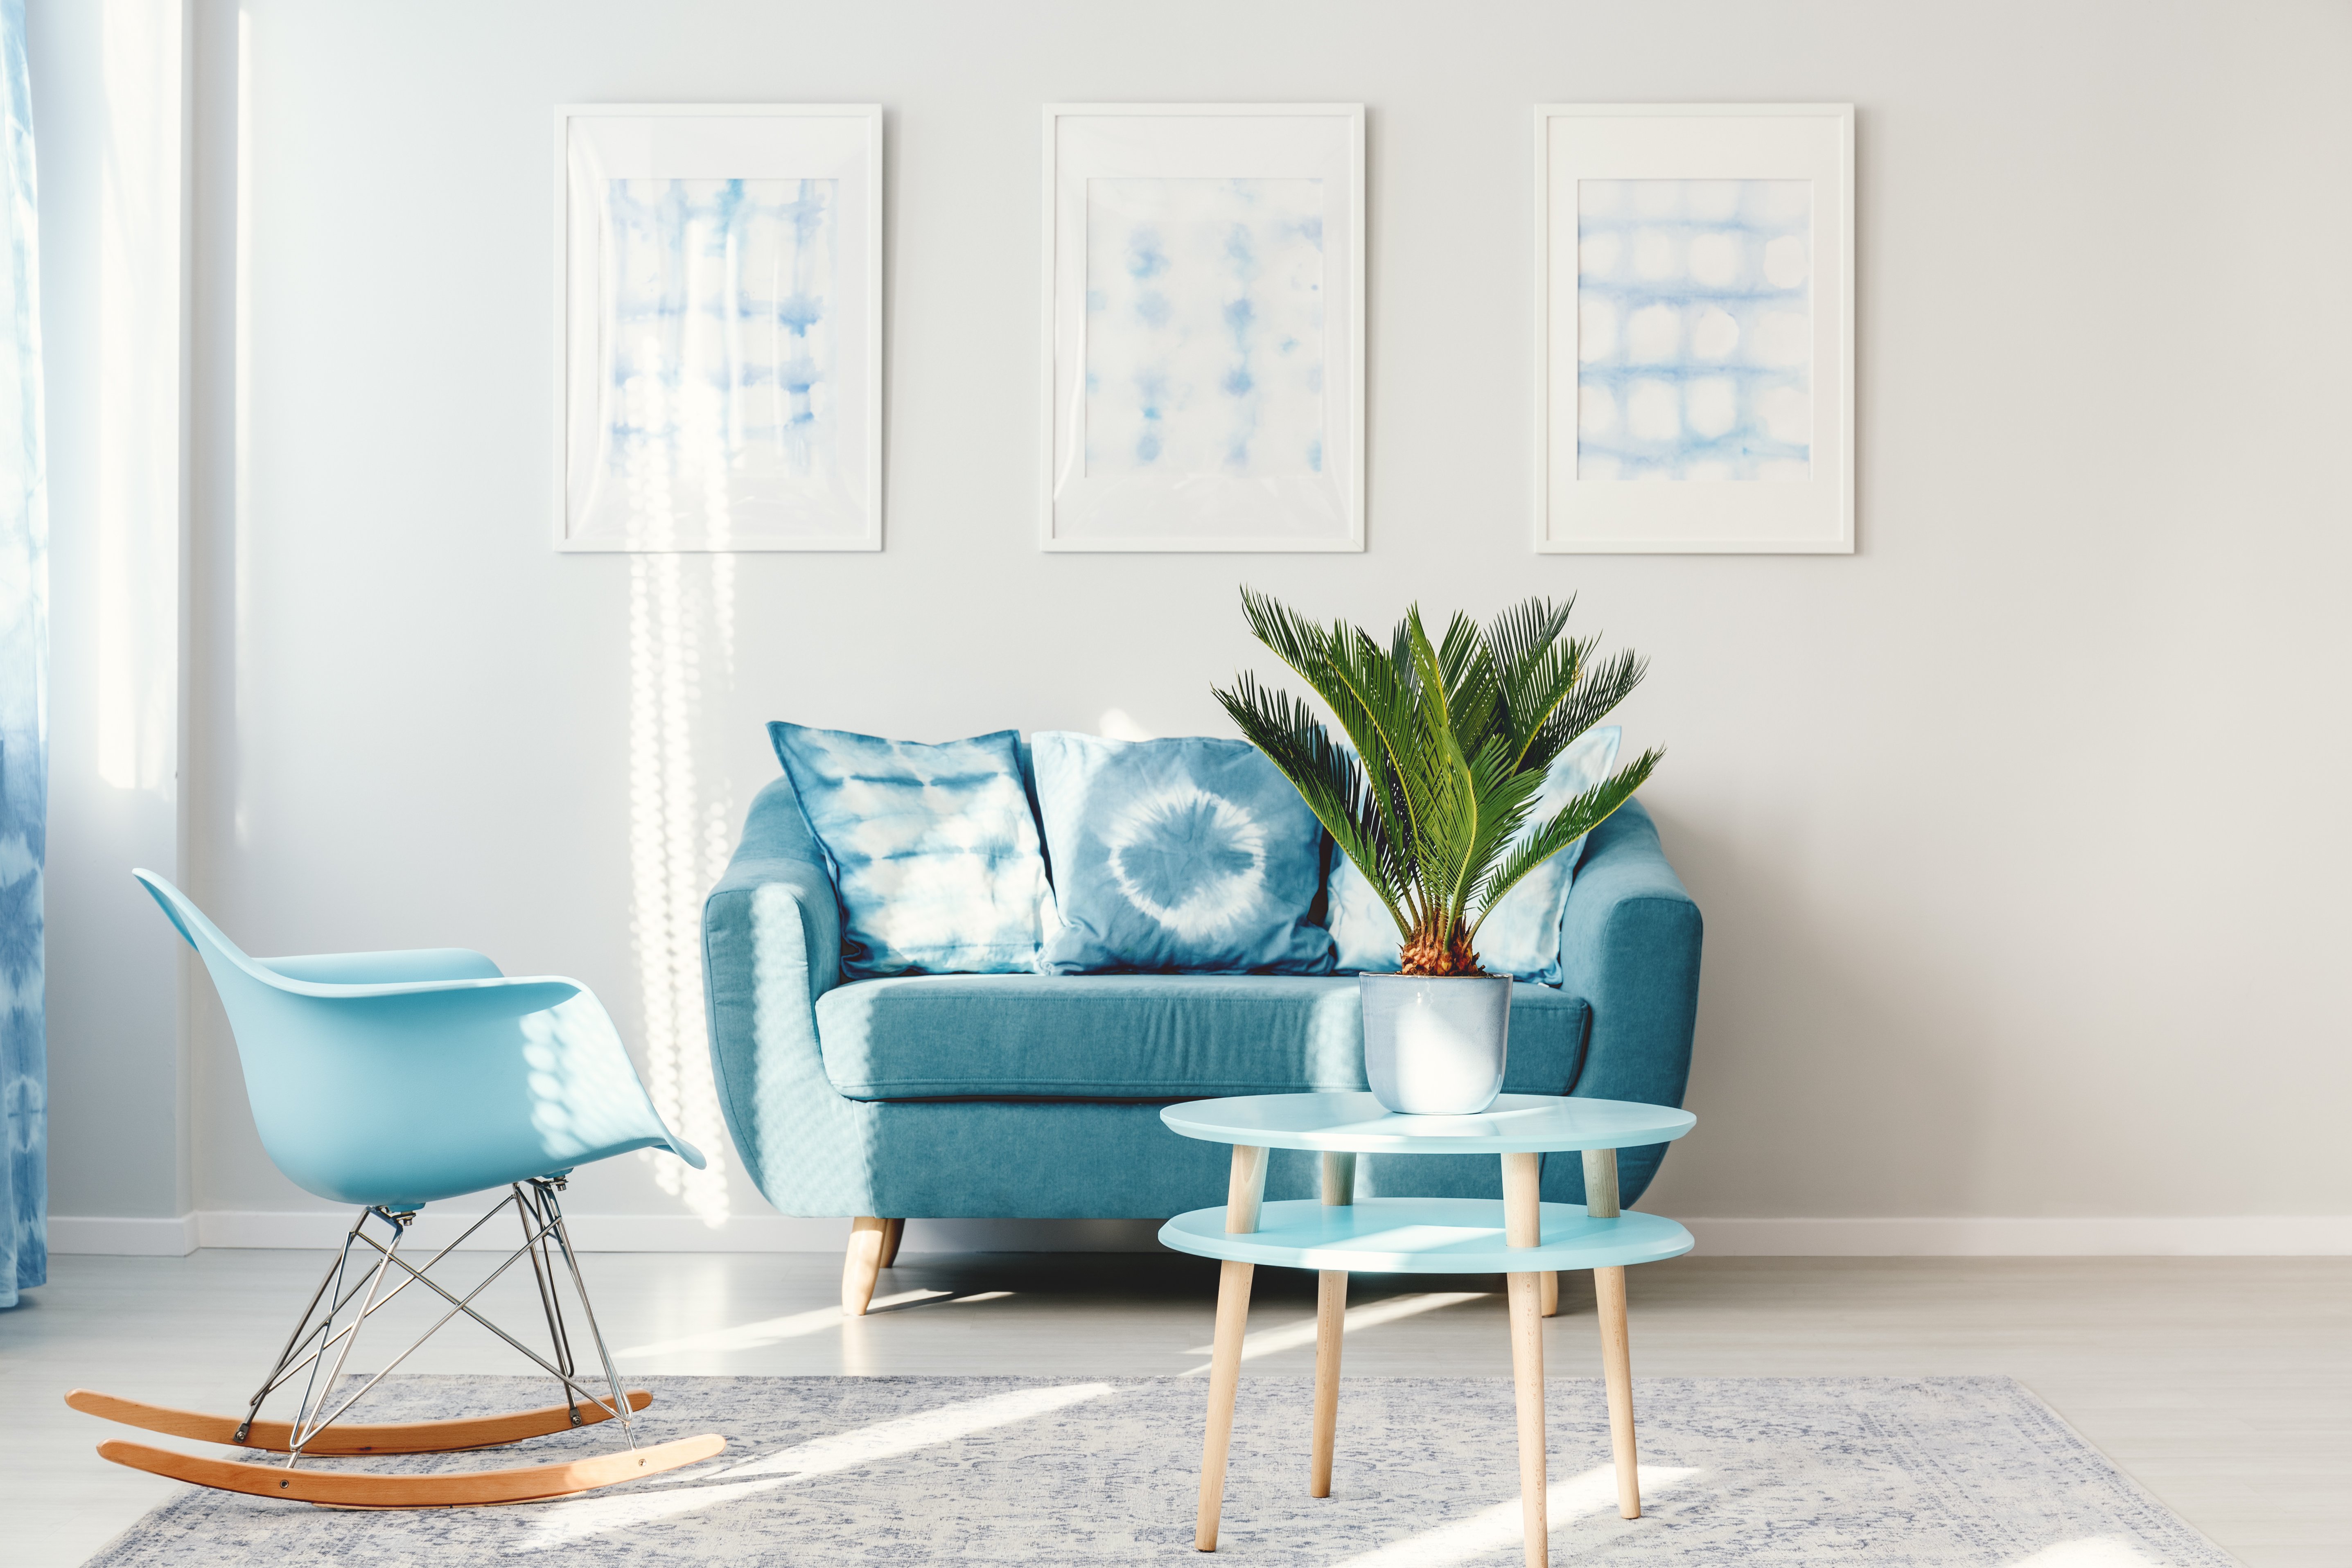 Is Your Home Decor On Trend With Summer? - A blog about real estate ...